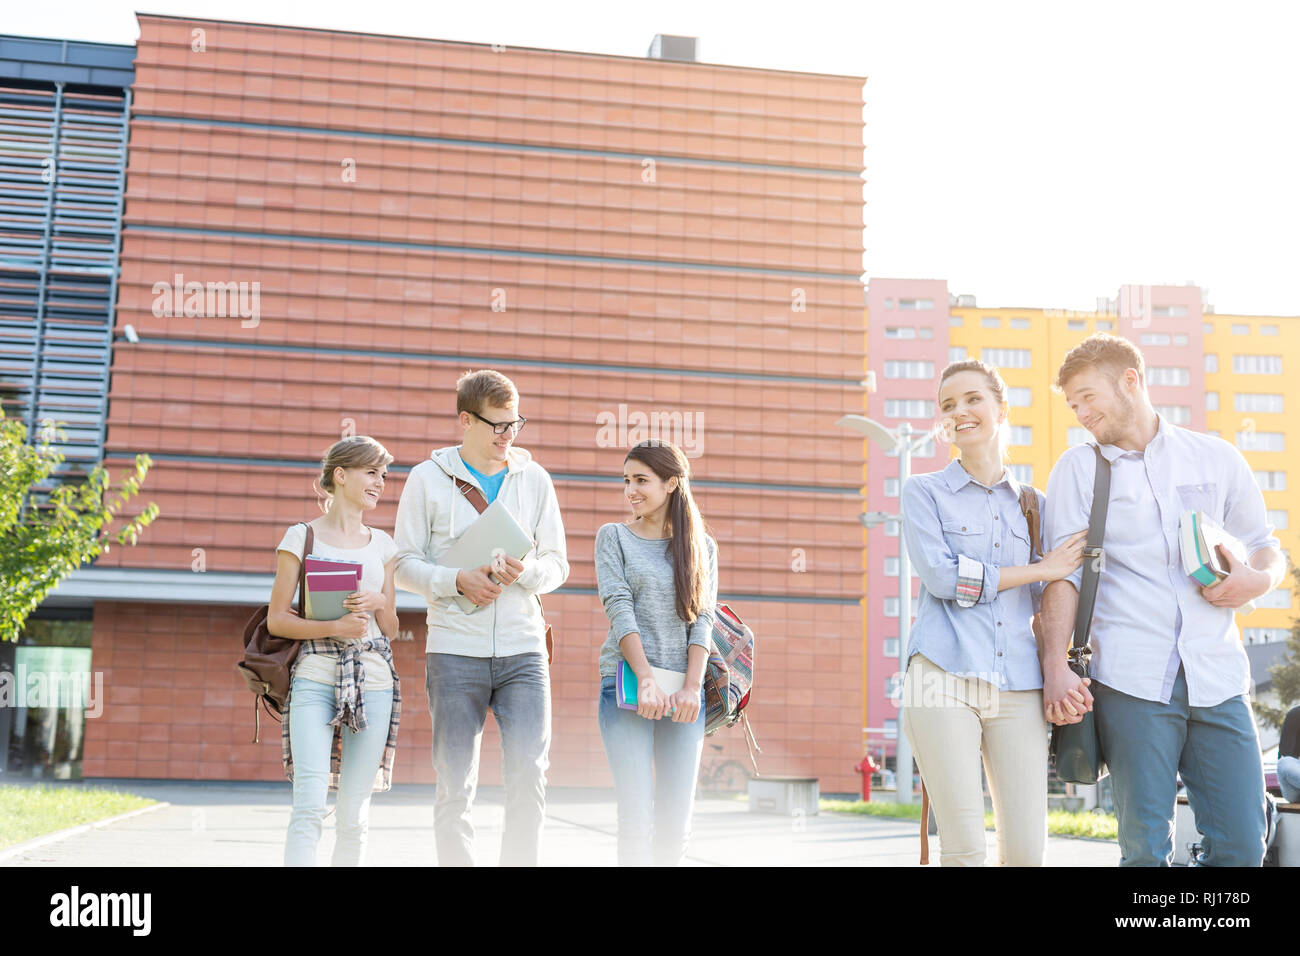 Smiling couple walking with friends in college campus Stock Photo